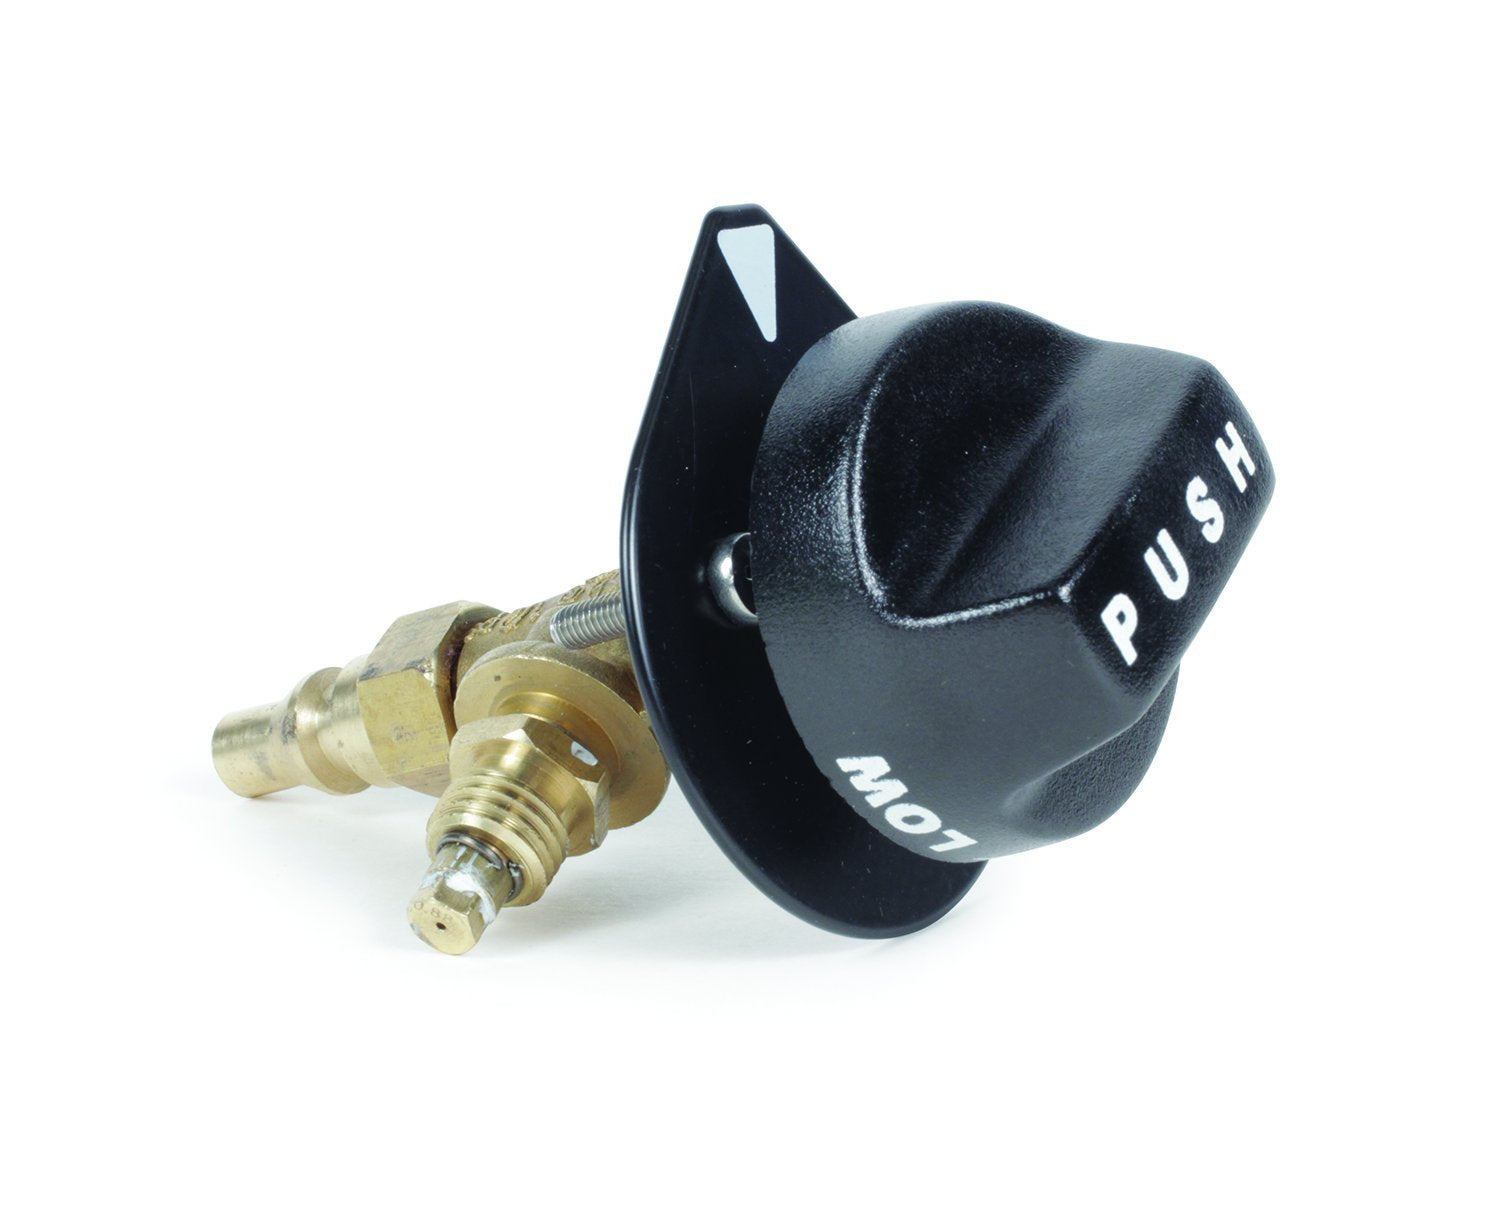 Camco Control Valve with Quick Connect Replacement Part for Olympian 5500 Grills - Designed for Using Your RV, Camper or Trailer's Propane Supply (57274)